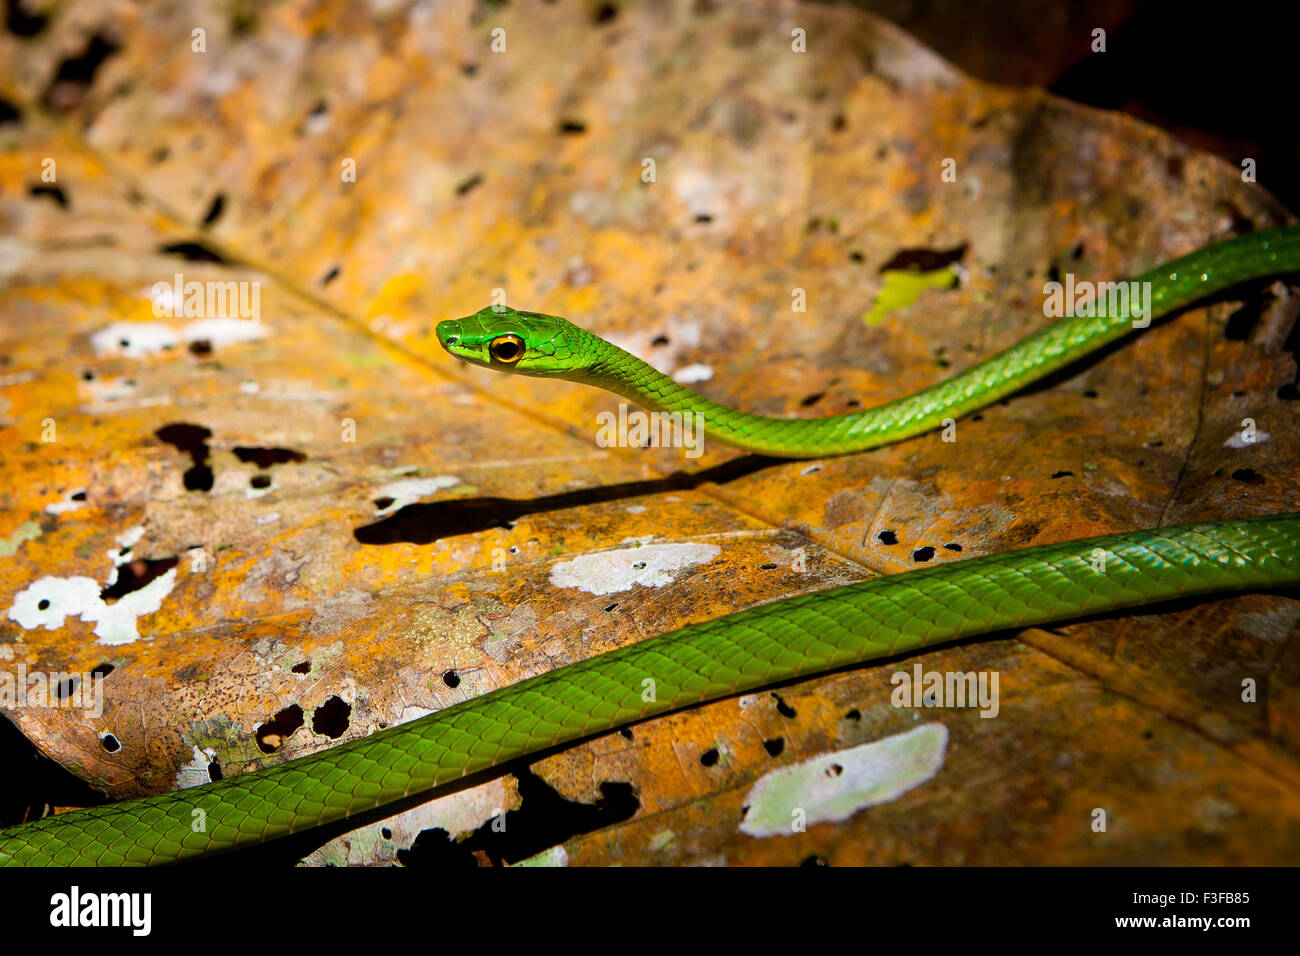 Panama wildlife with a green vine snake, Oxybelis fulgidus, on the rainforest floor in Chagres national park, along the old Camino Real Trail, Panama. Stock Photo